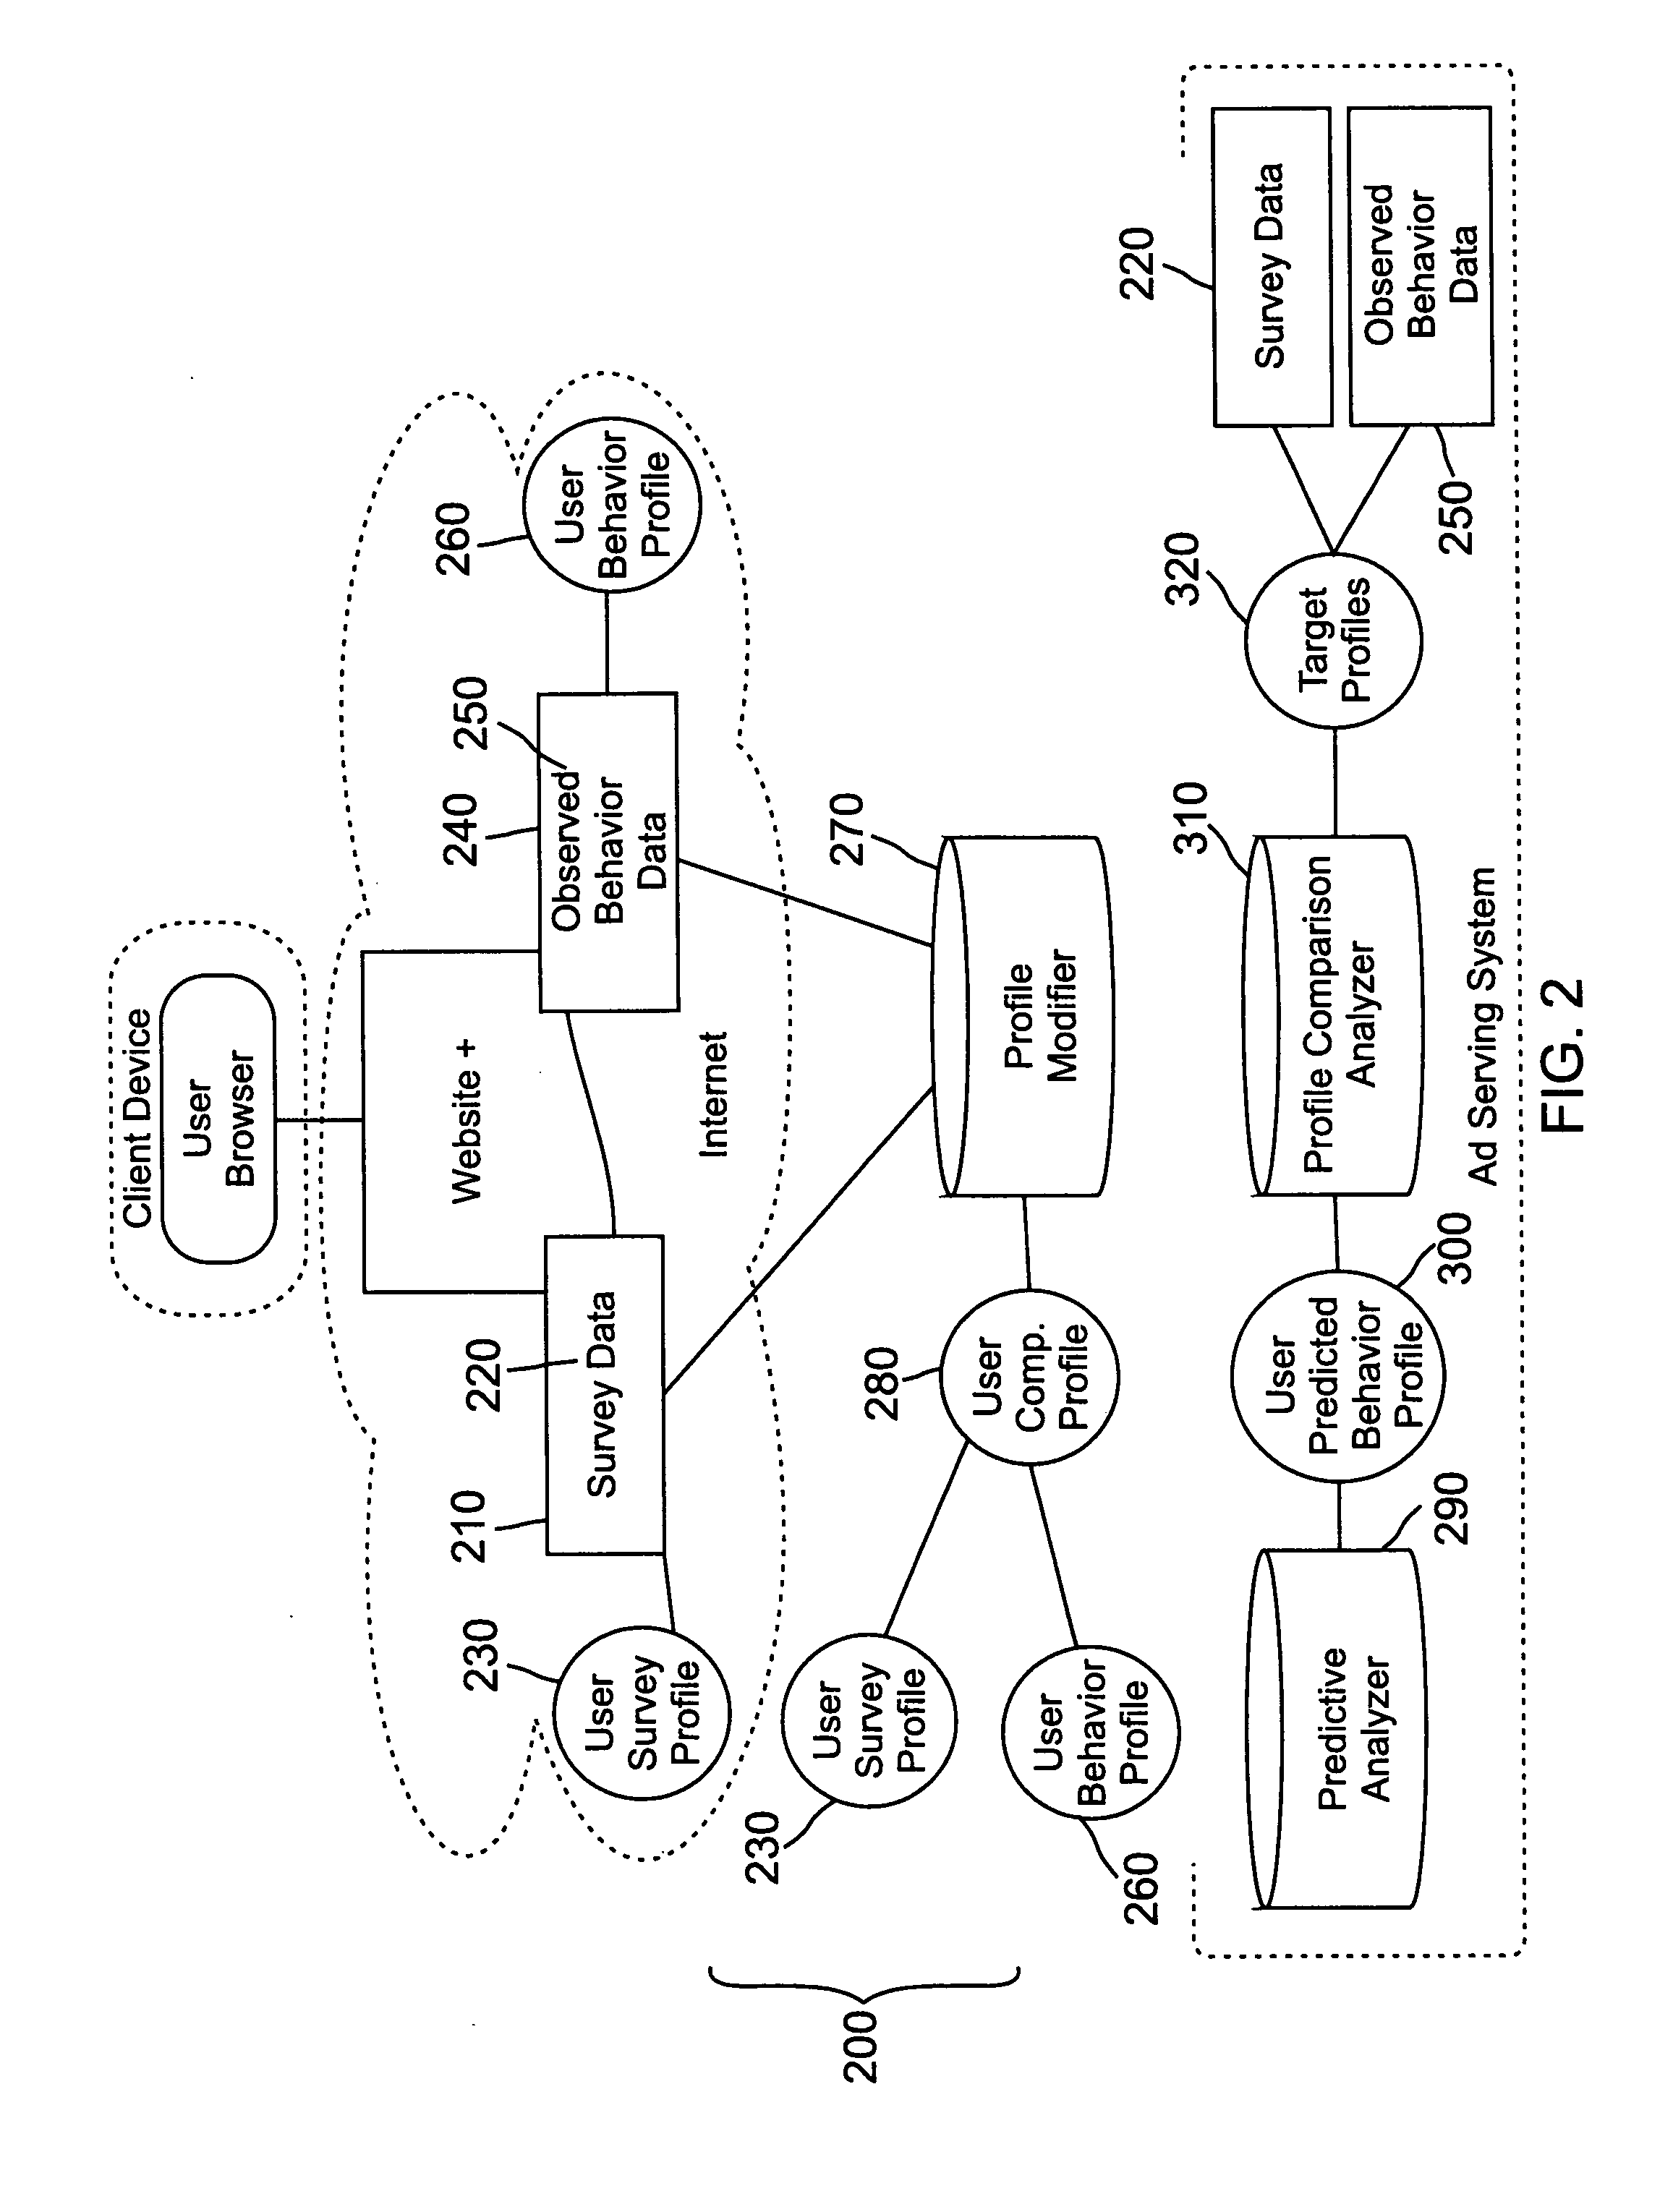 Method for selecting an optimal classification protocol for classifying one or more targets